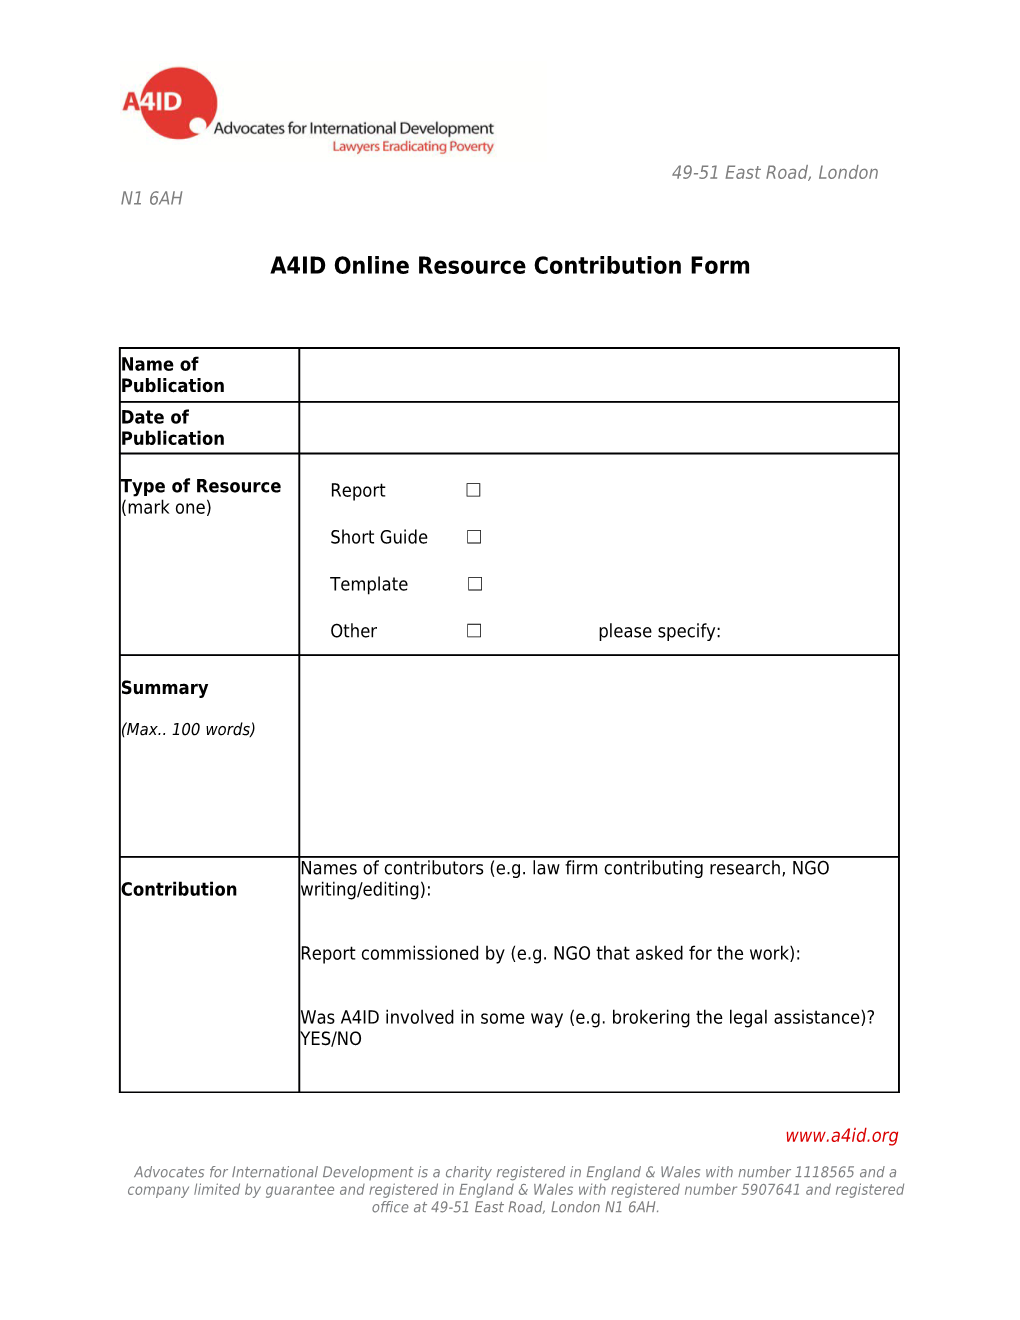 A4ID Online Resource Contribution Form